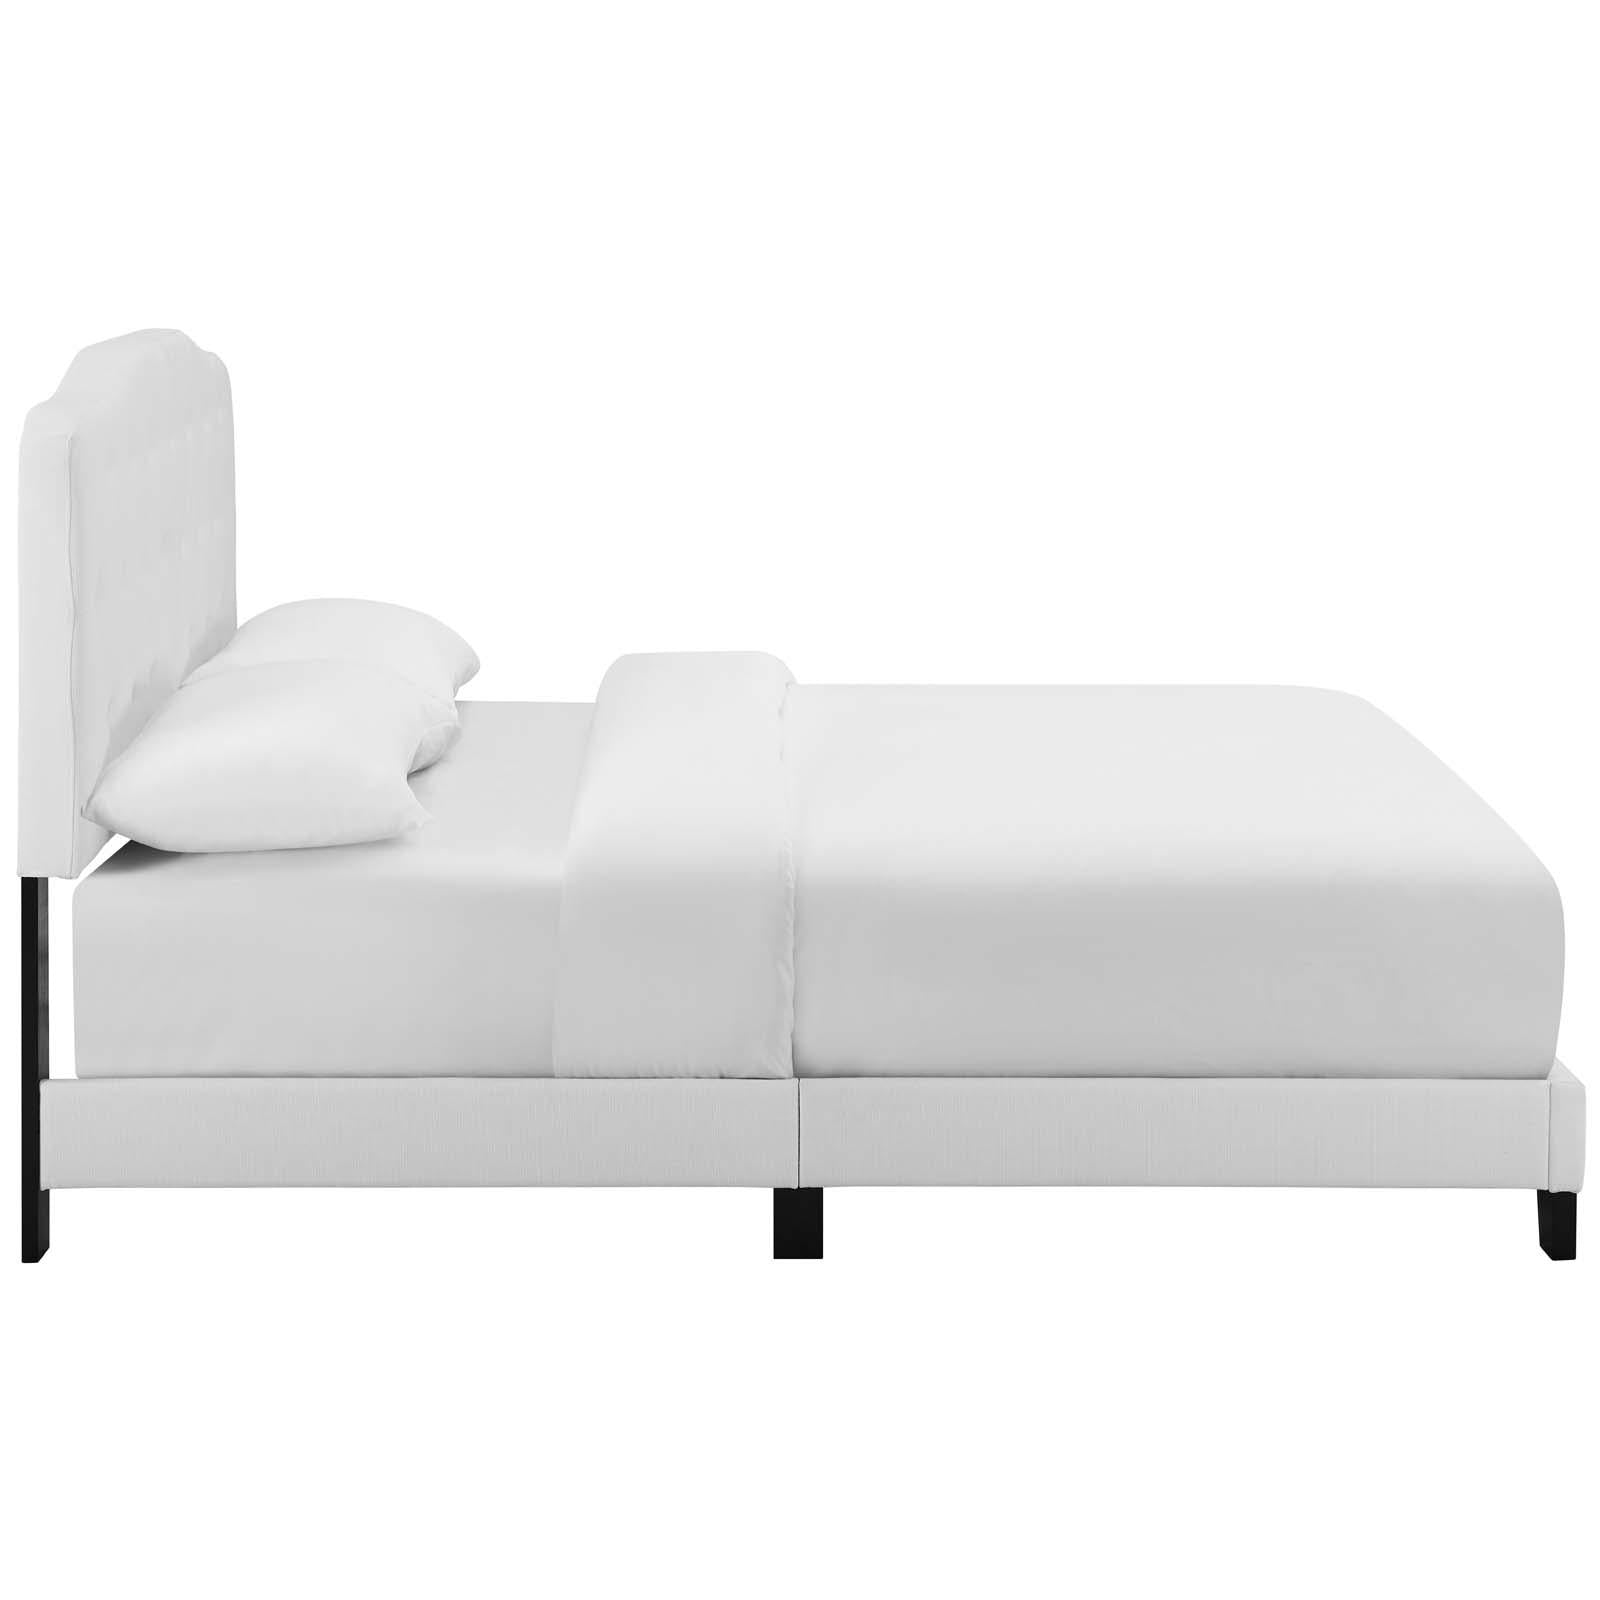 Modway Furniture Modern Amelia Full Upholstered Fabric Bed - MOD-5839